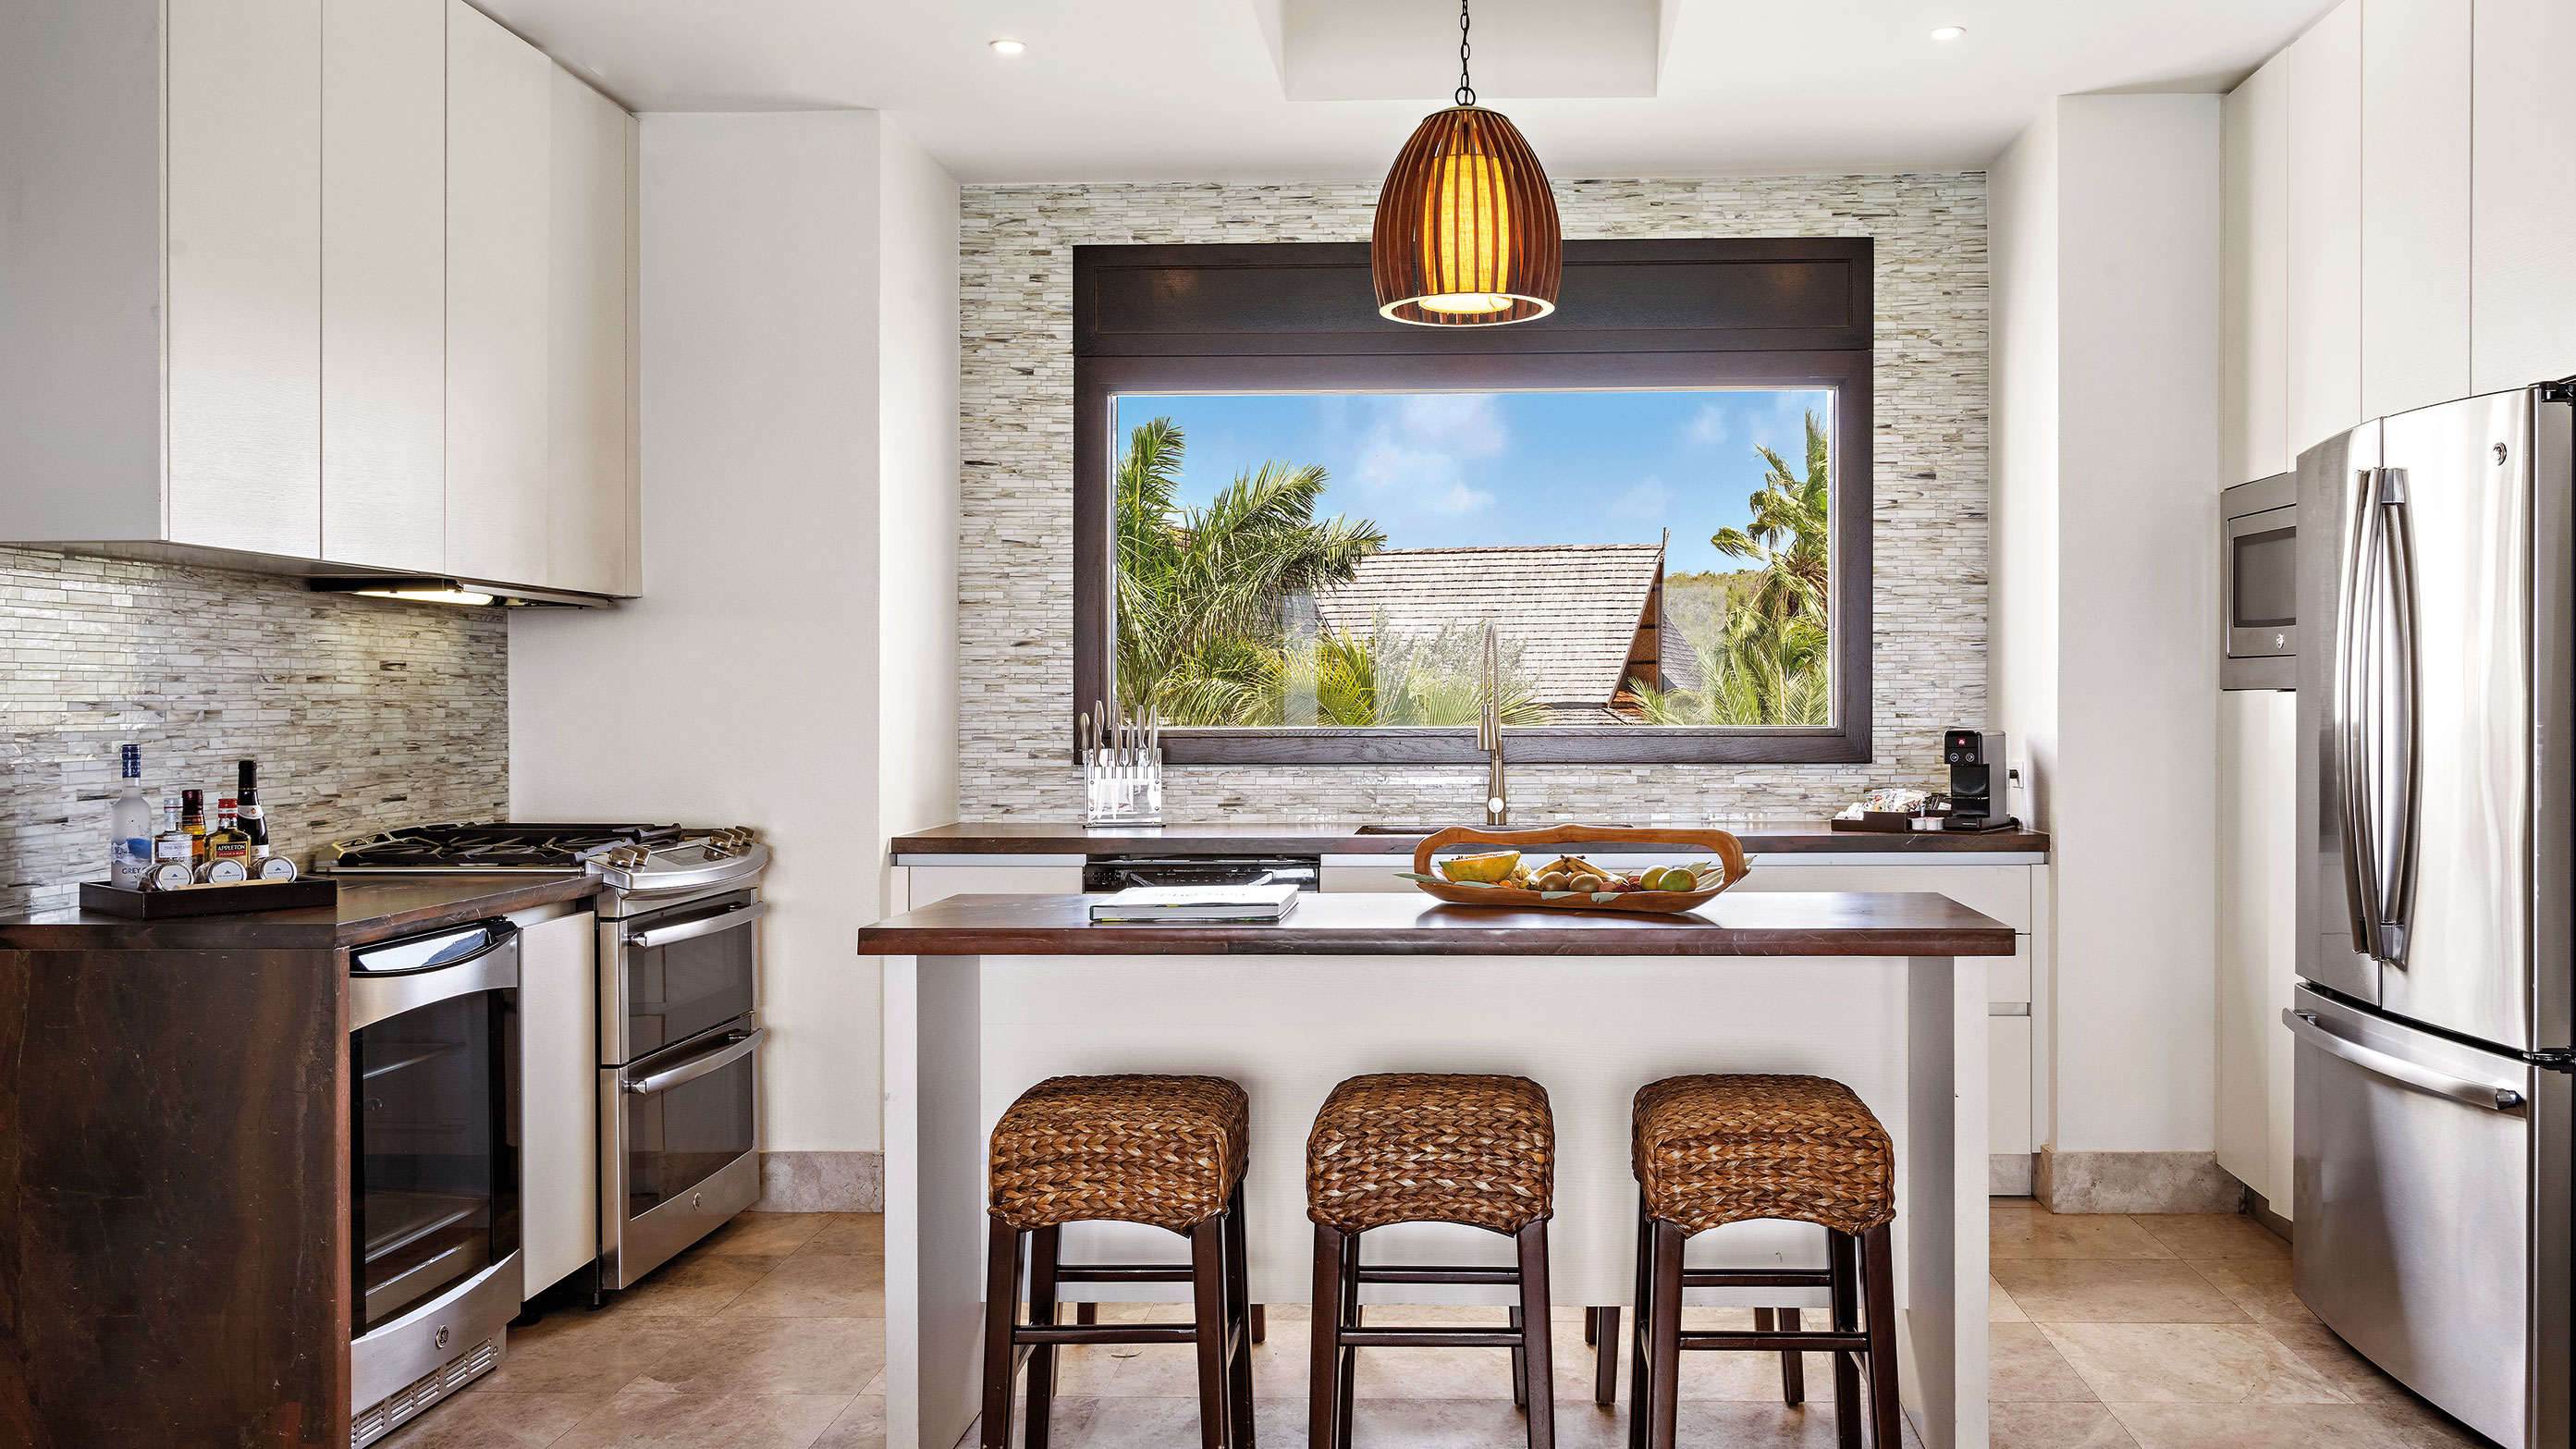 Kitchen island, stools, full kitchen, and view of palm trees from window